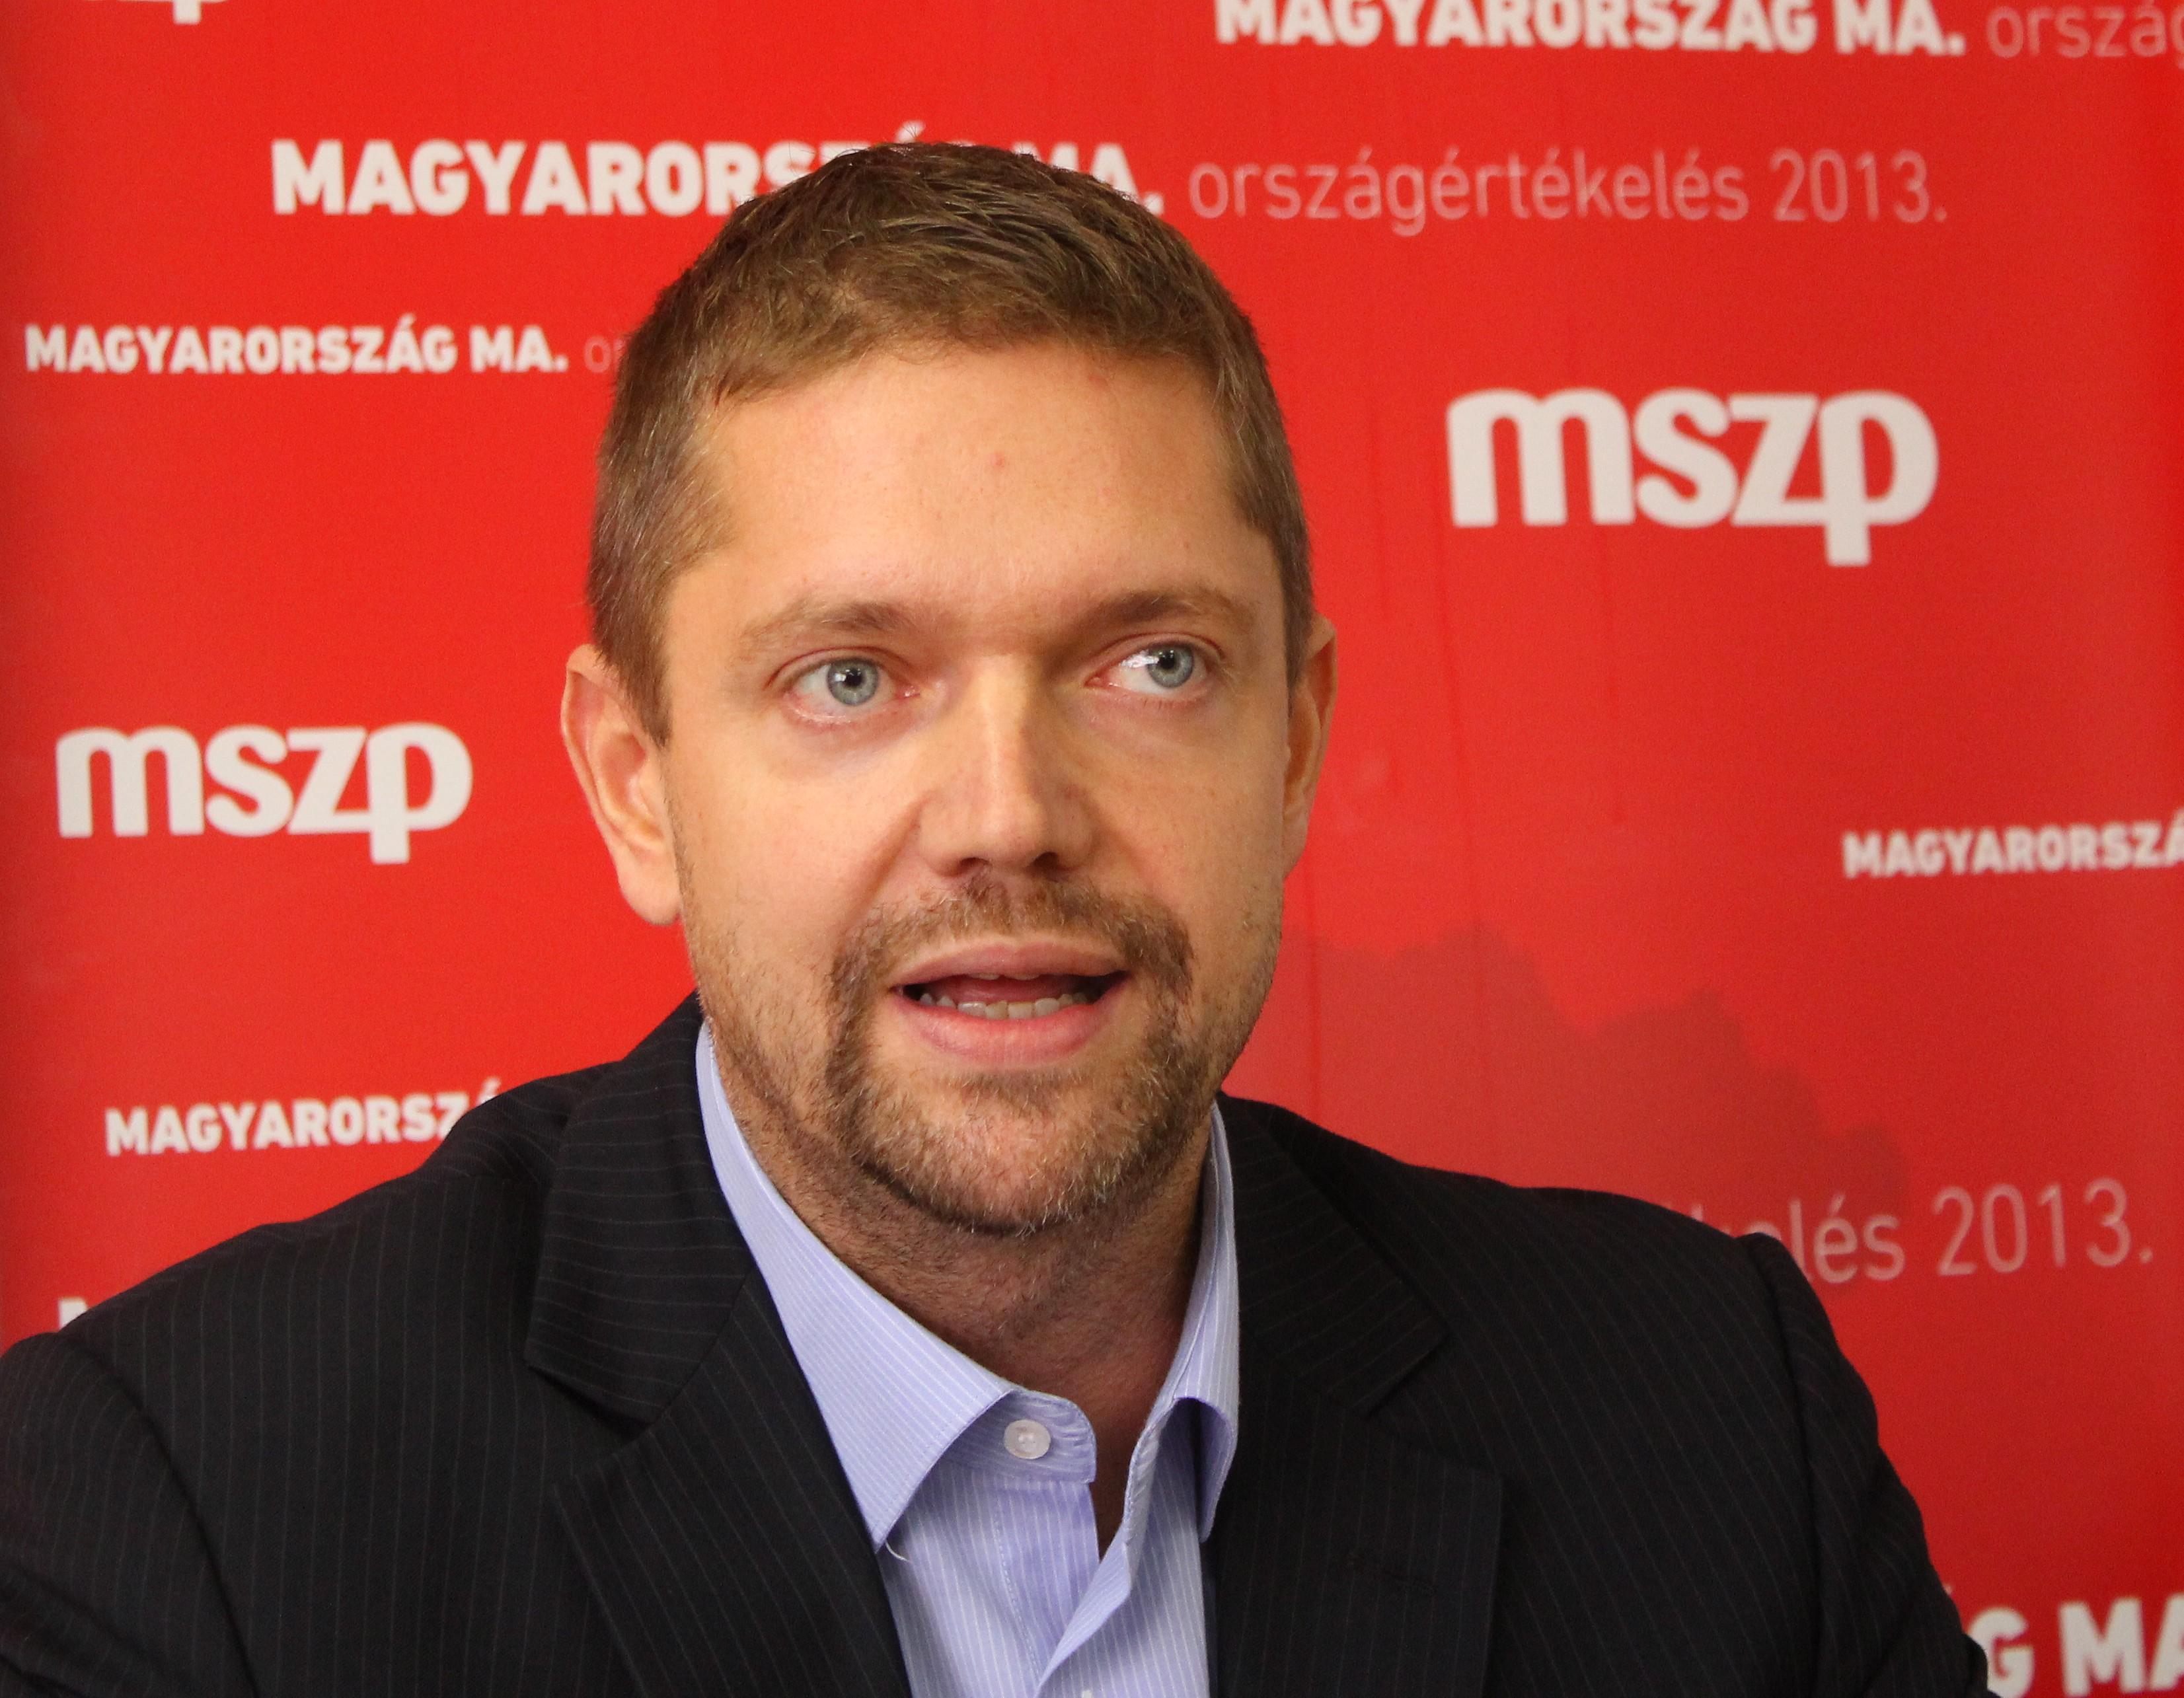 Socialists To Reduce Parliamentary Activity Till Election